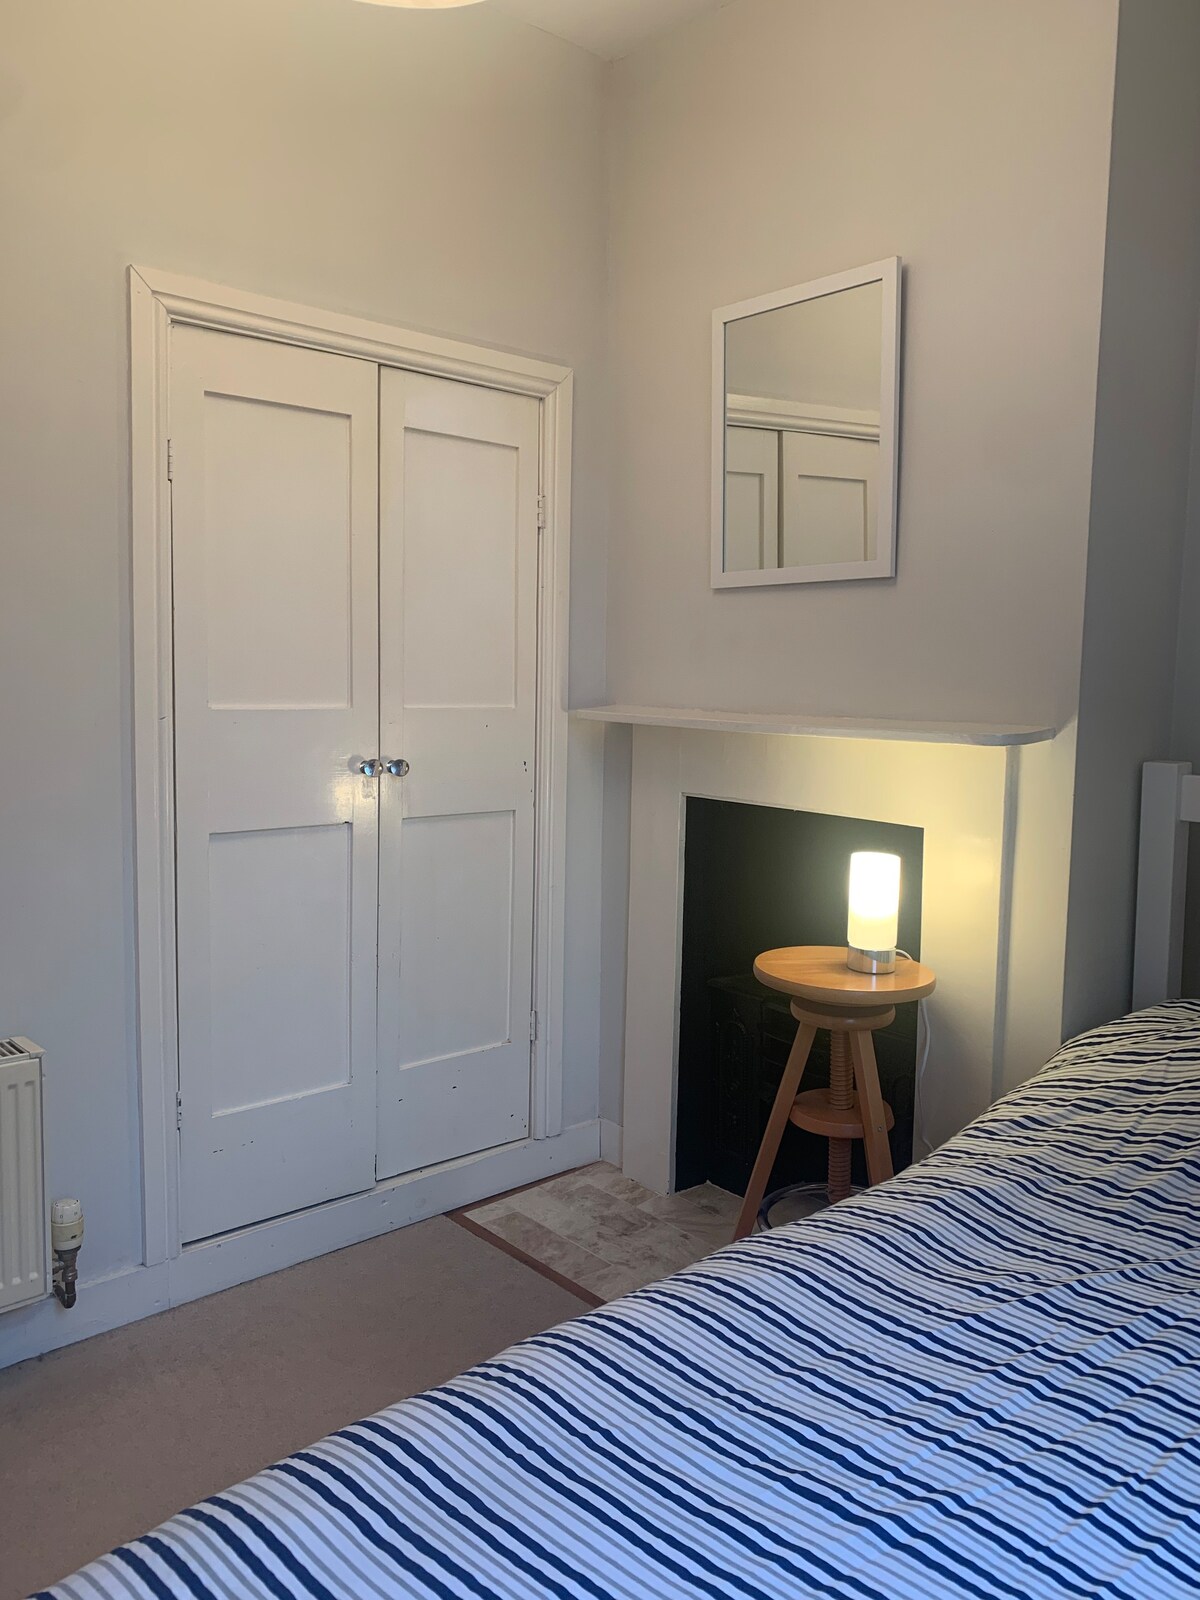 Single room in Winchester